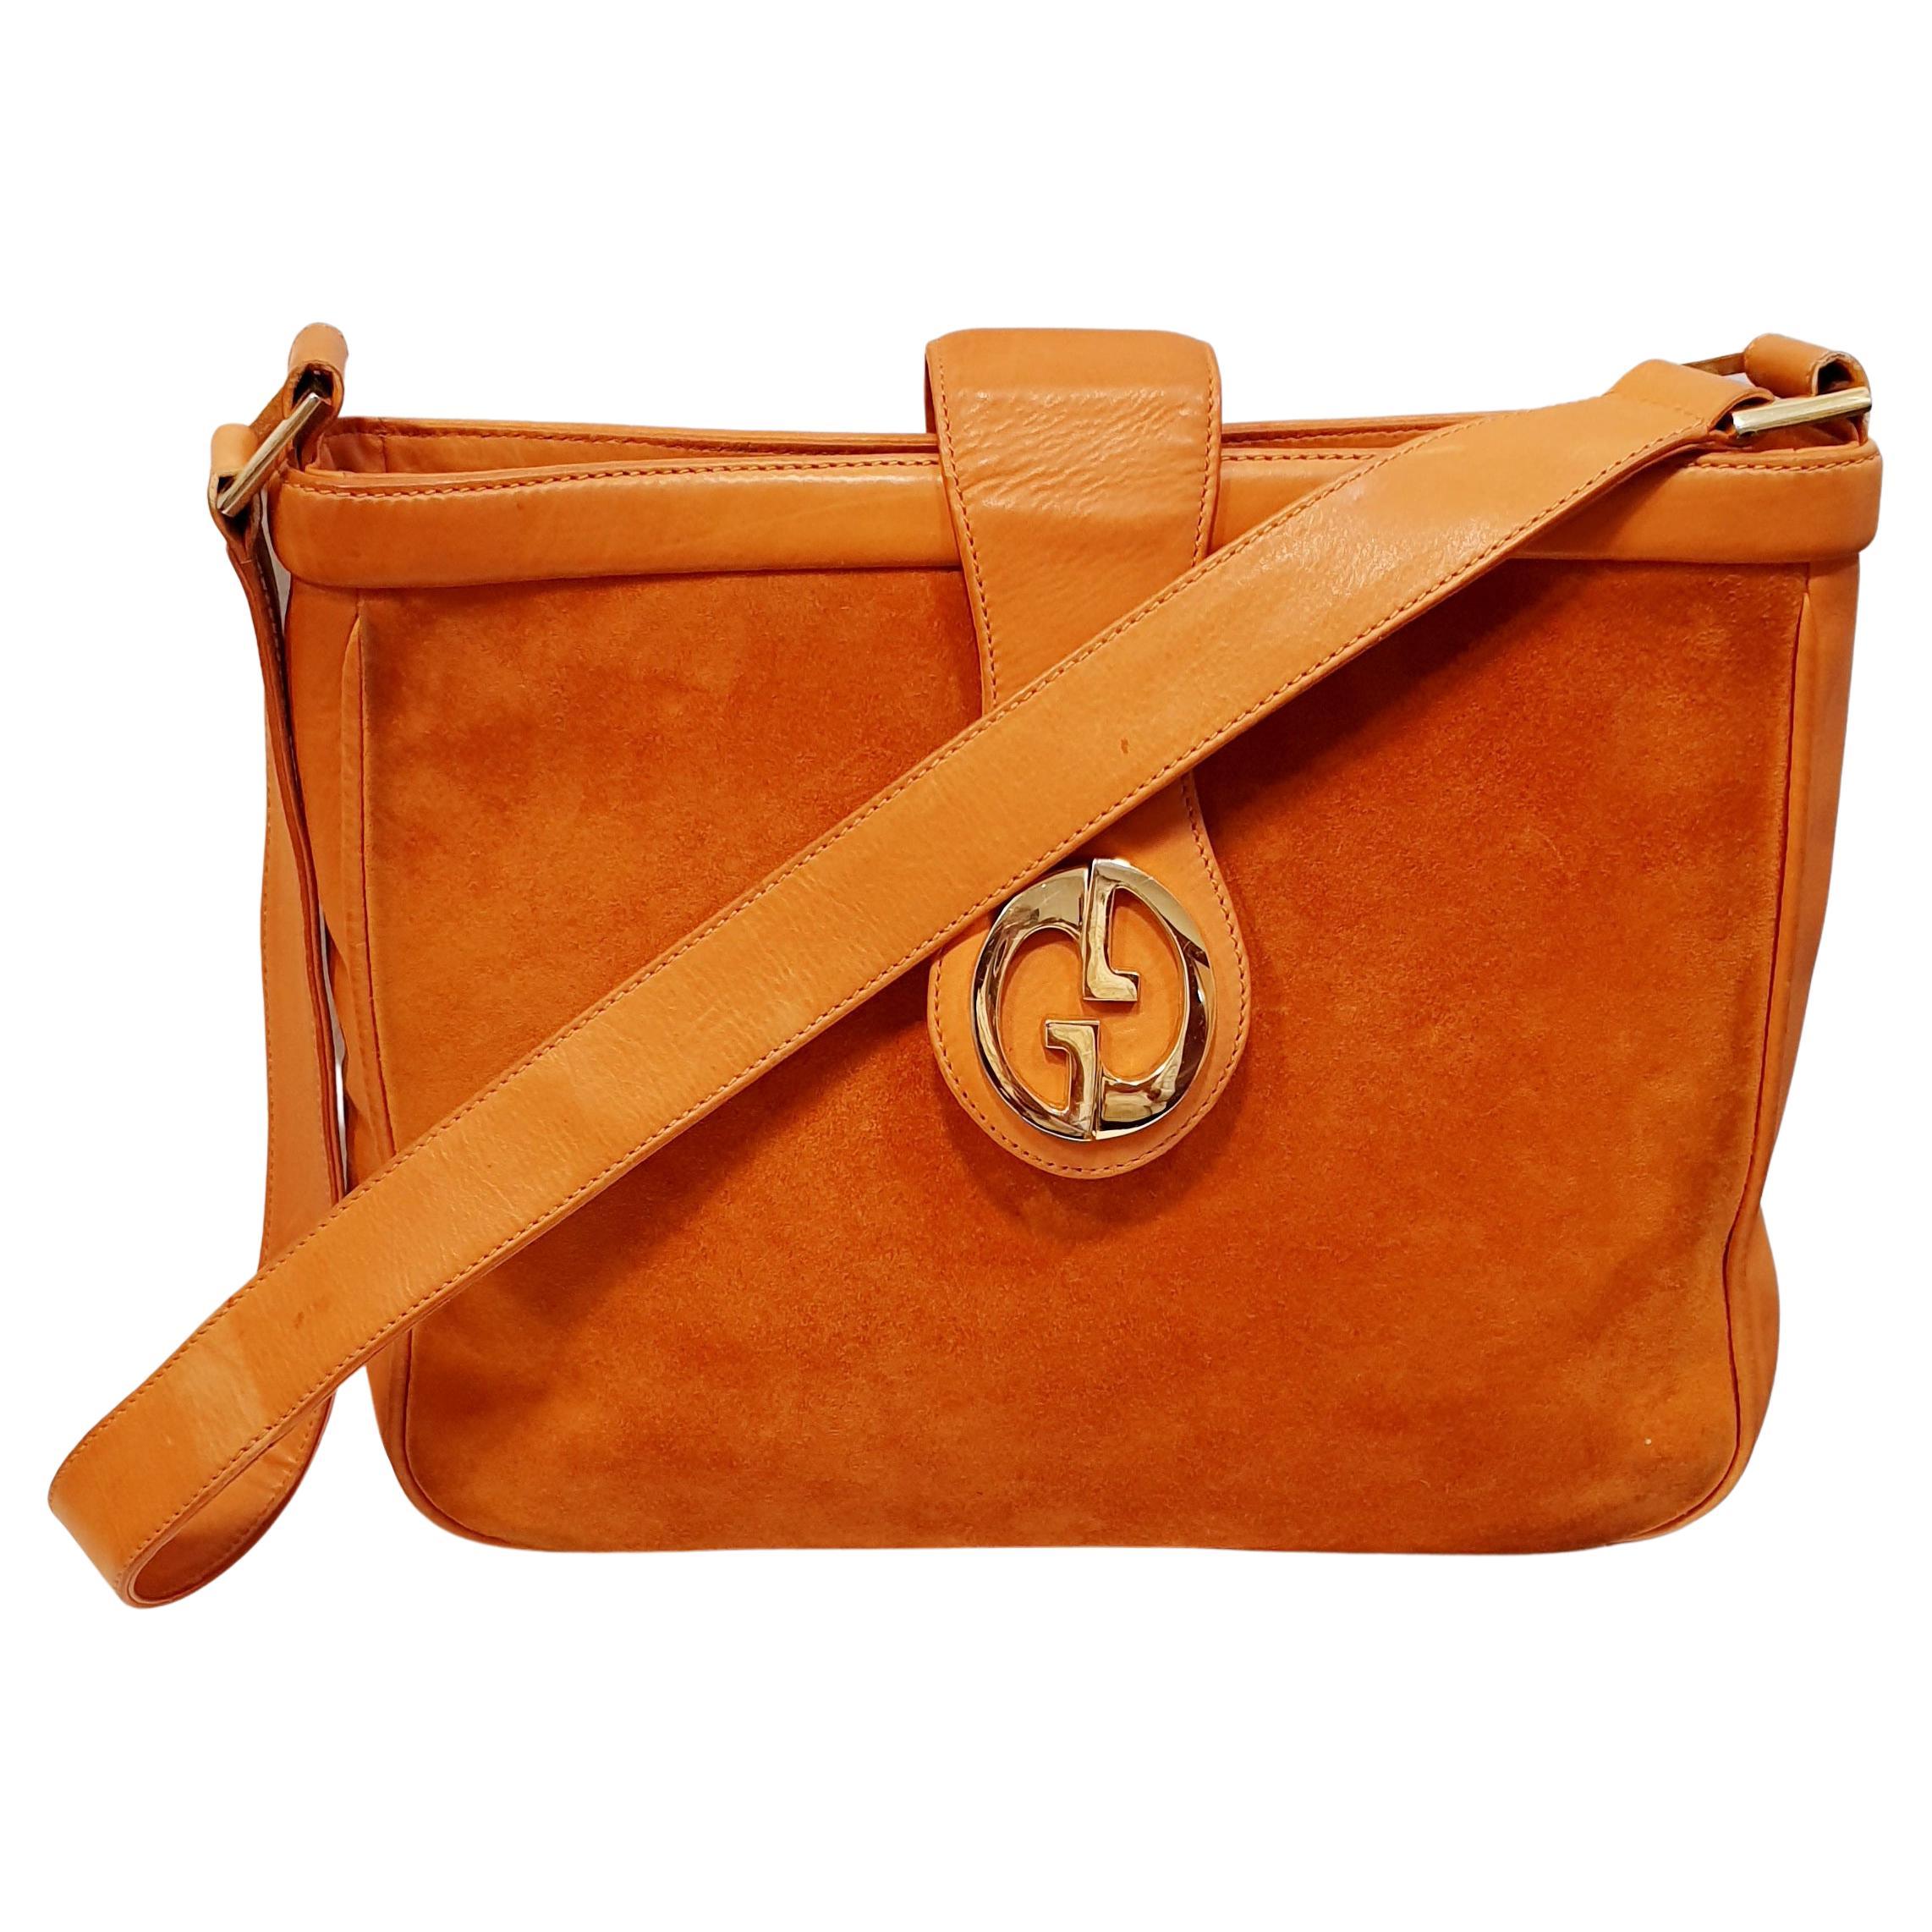 Vintage Gucci Orange Suede and  Leather Handbag With Gold G's
Material Suede and Leather
Color Orange
Length   26 cm 10,23 inches
Height   22 cm  8,66 inches


PRADERA Fashion Division  is specialised in European Fashion designers, clothing,